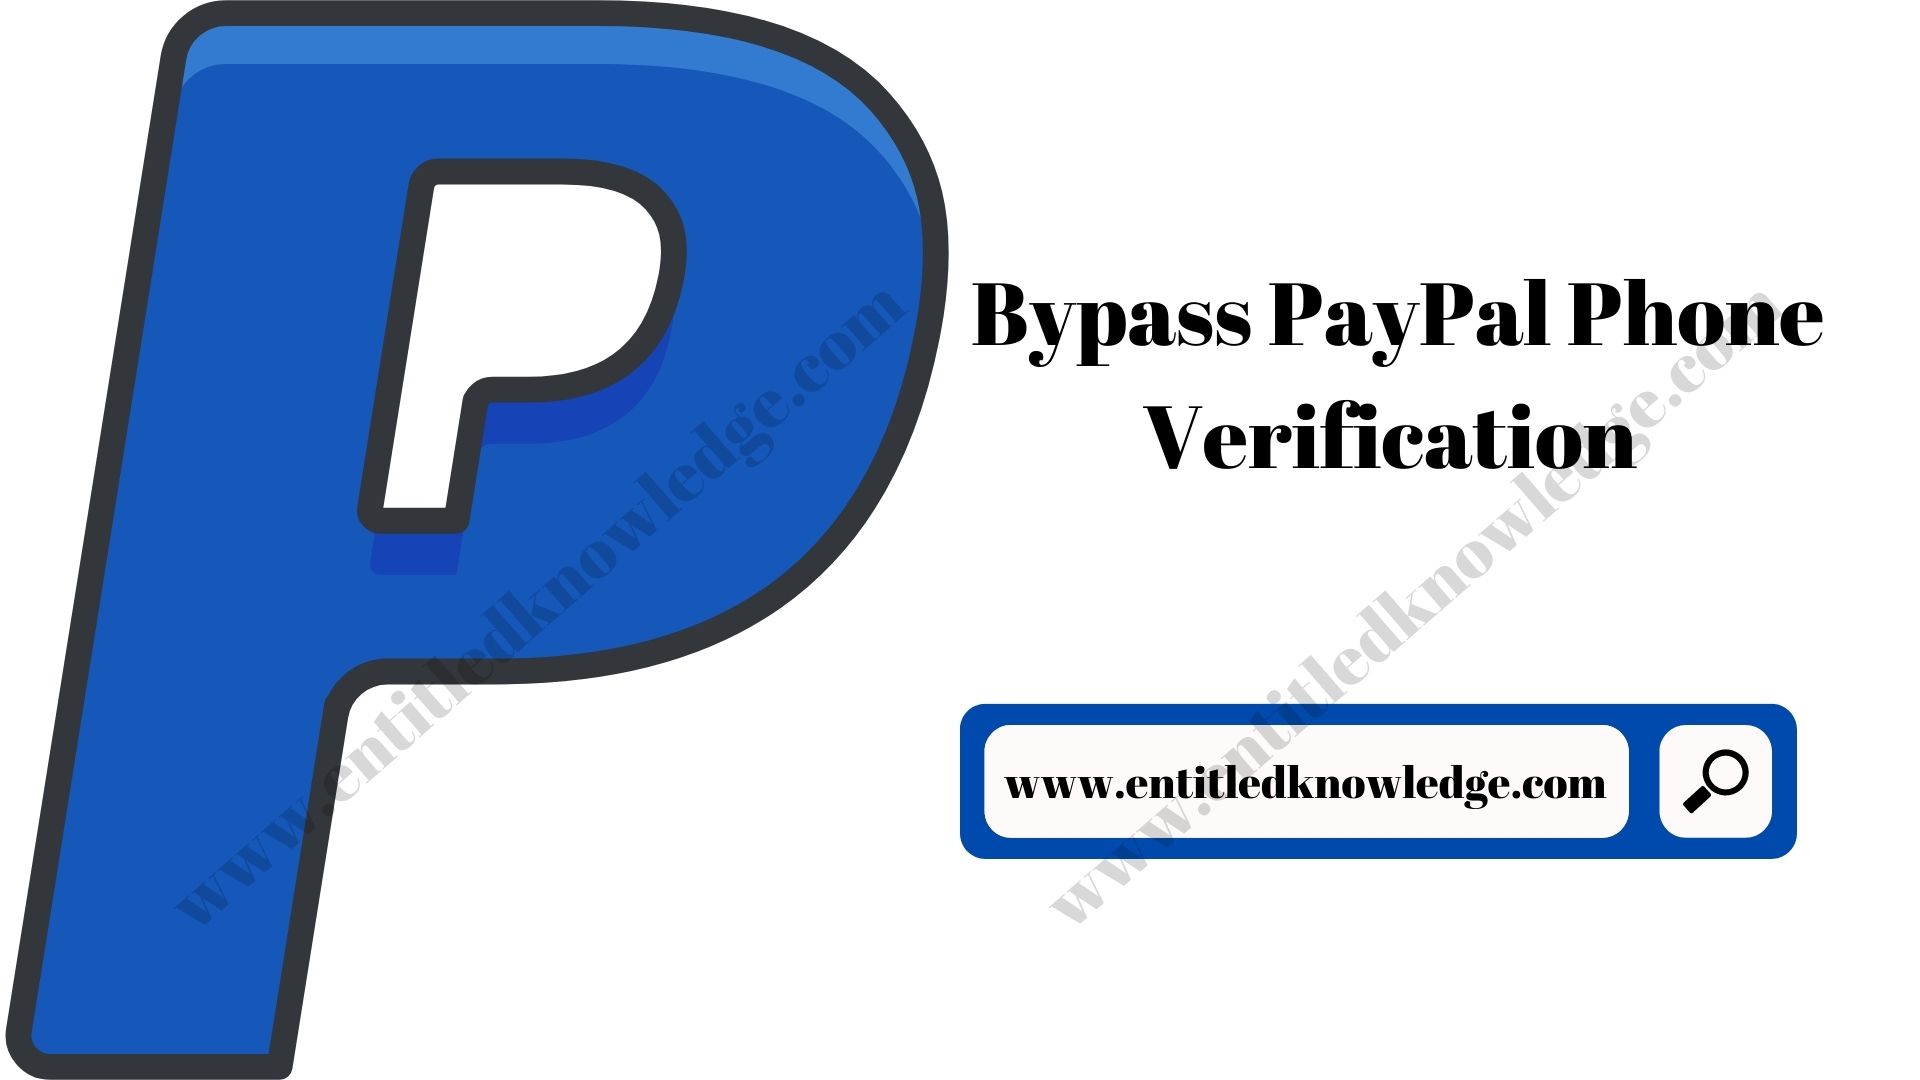 Top Ways To Bypass PayPal Phone Verification